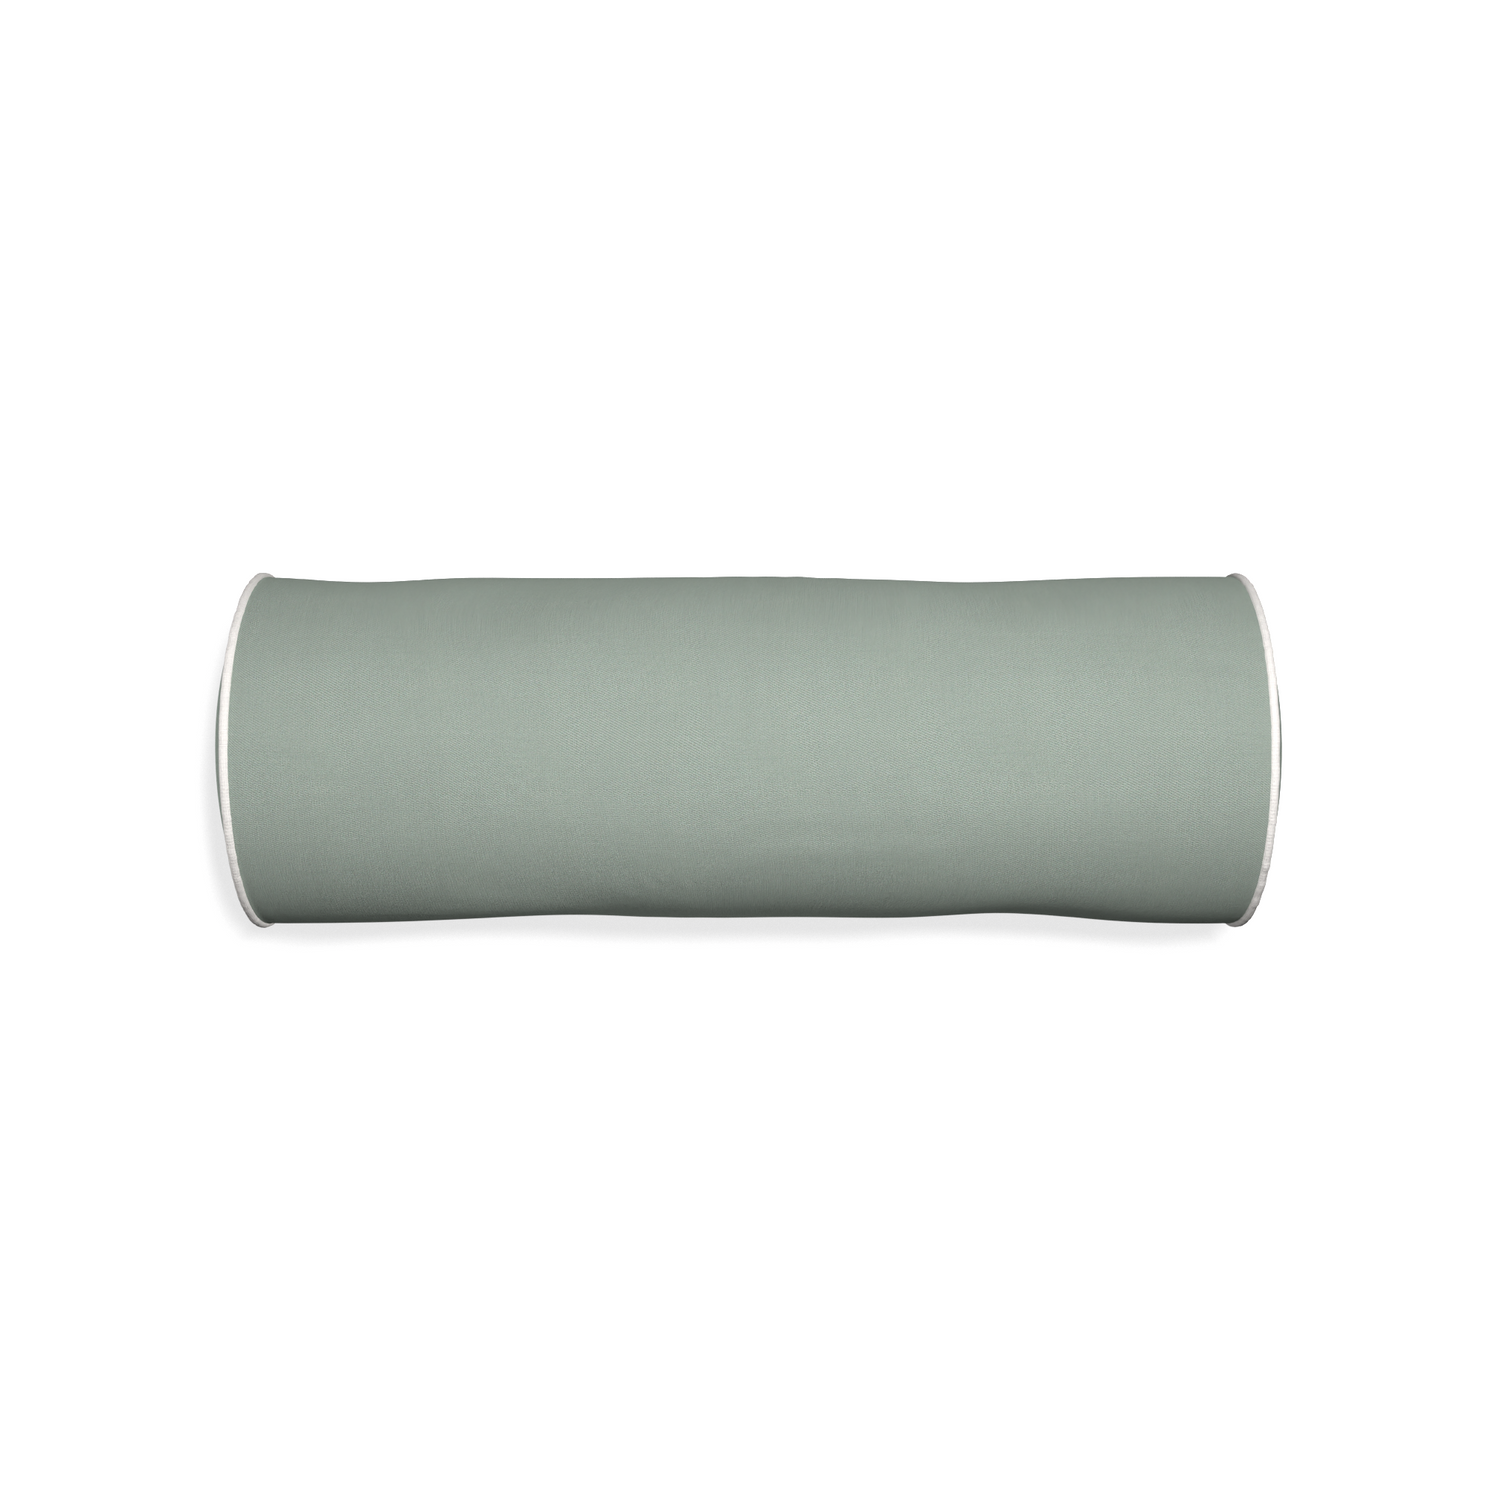 Bolster sage custom sage green cottonpillow with snow piping on white background